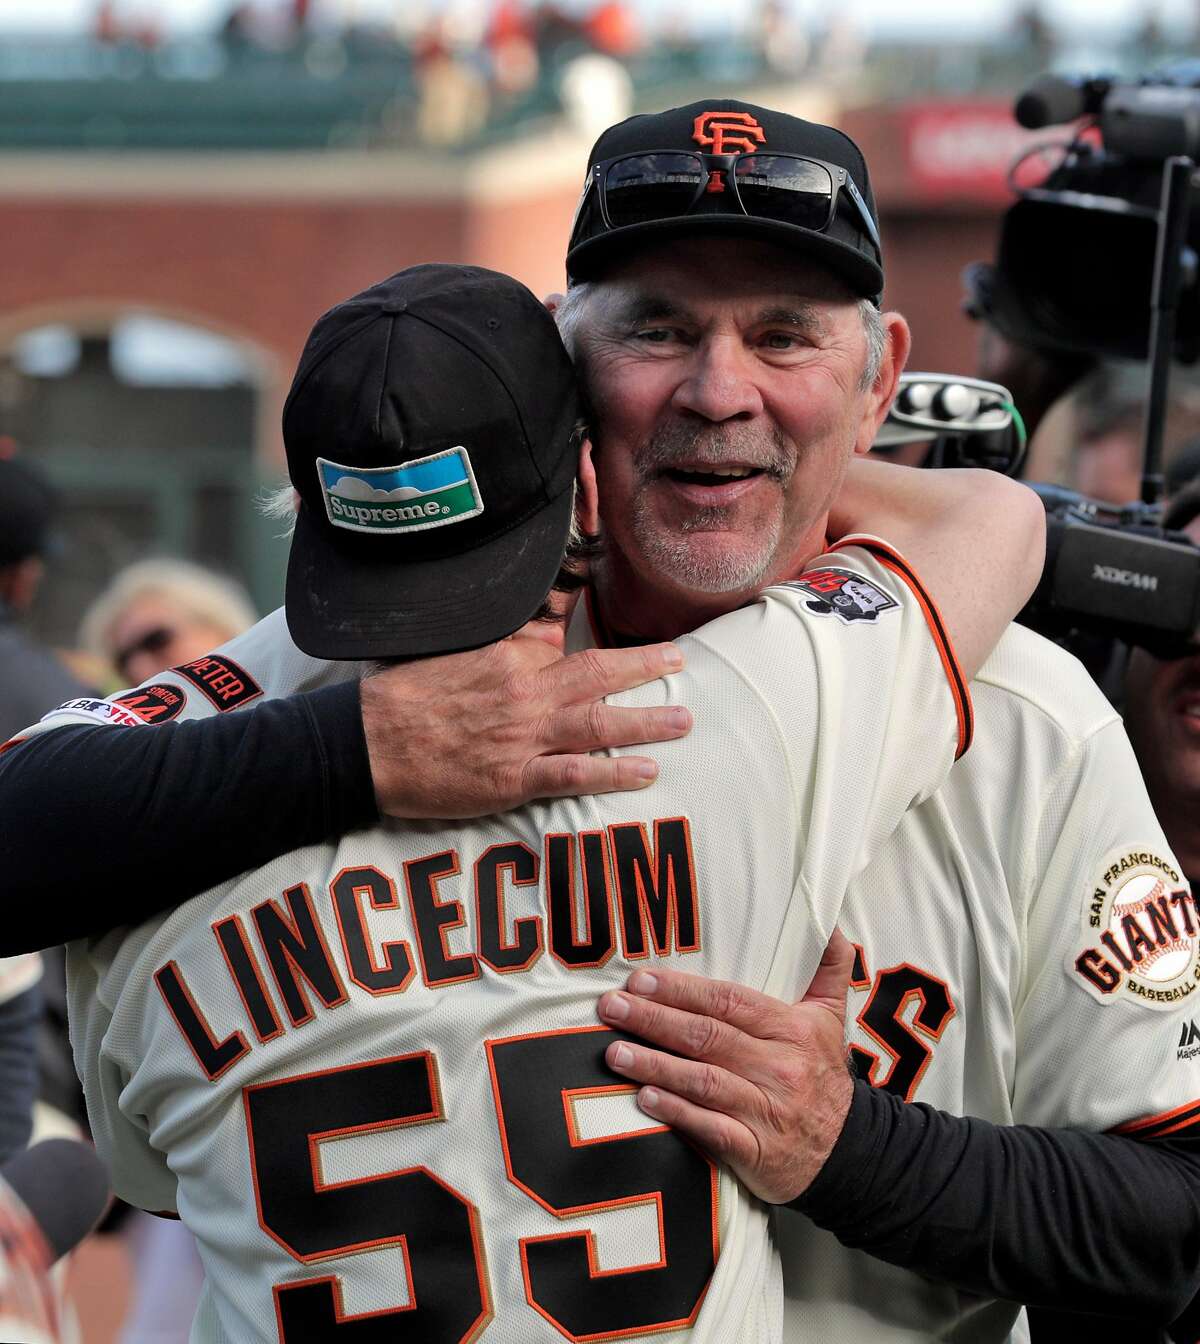 Bruce Bochy likely to get a loving reception at Giants' ballpark